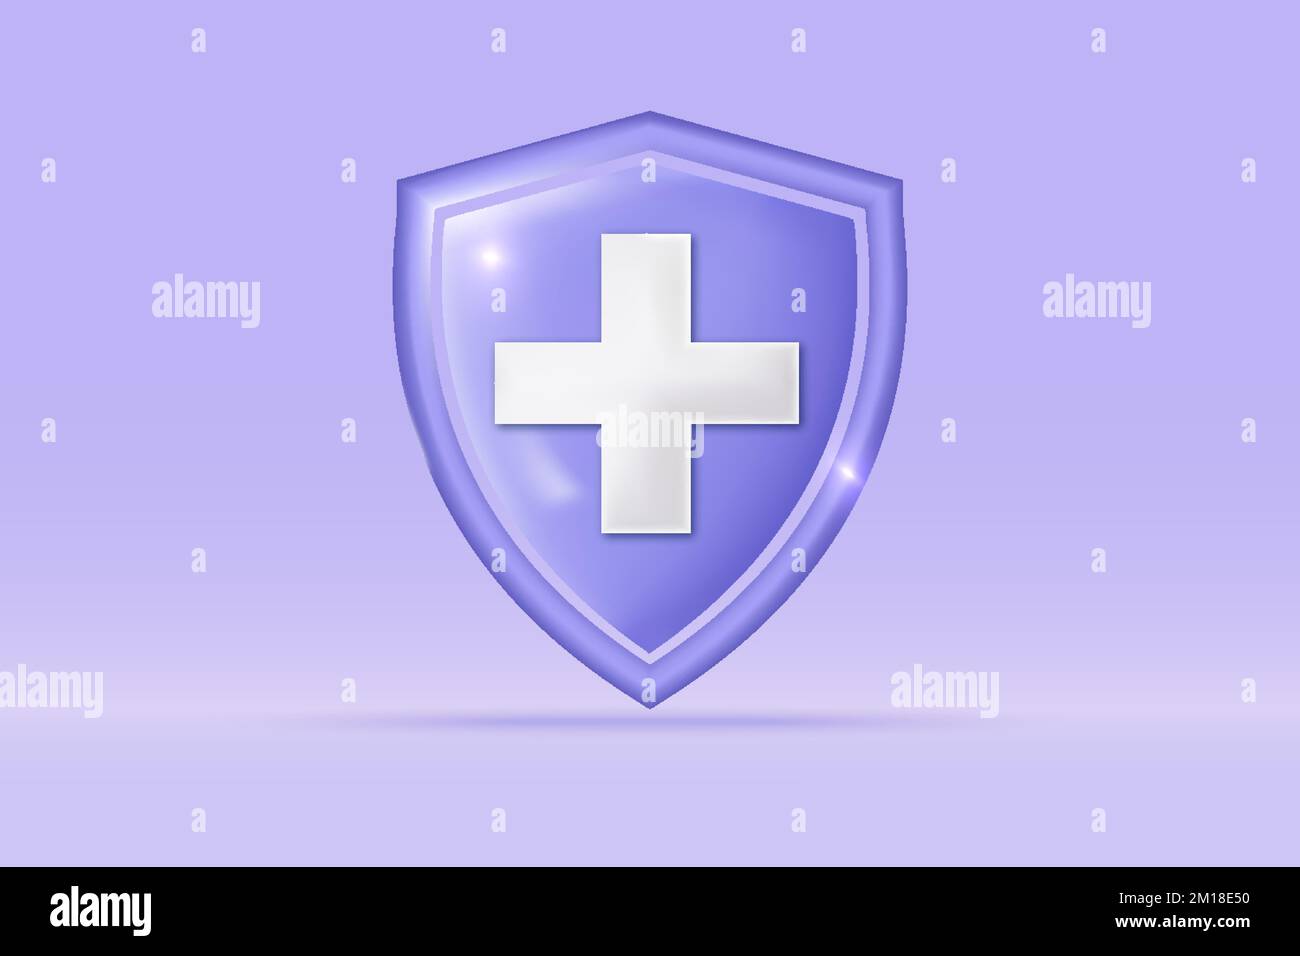 3d Medical emergency plus sign icon Isolated on light blue background. Realistic shield first aid and health care concept 3d vector rendering illustra Stock Vector